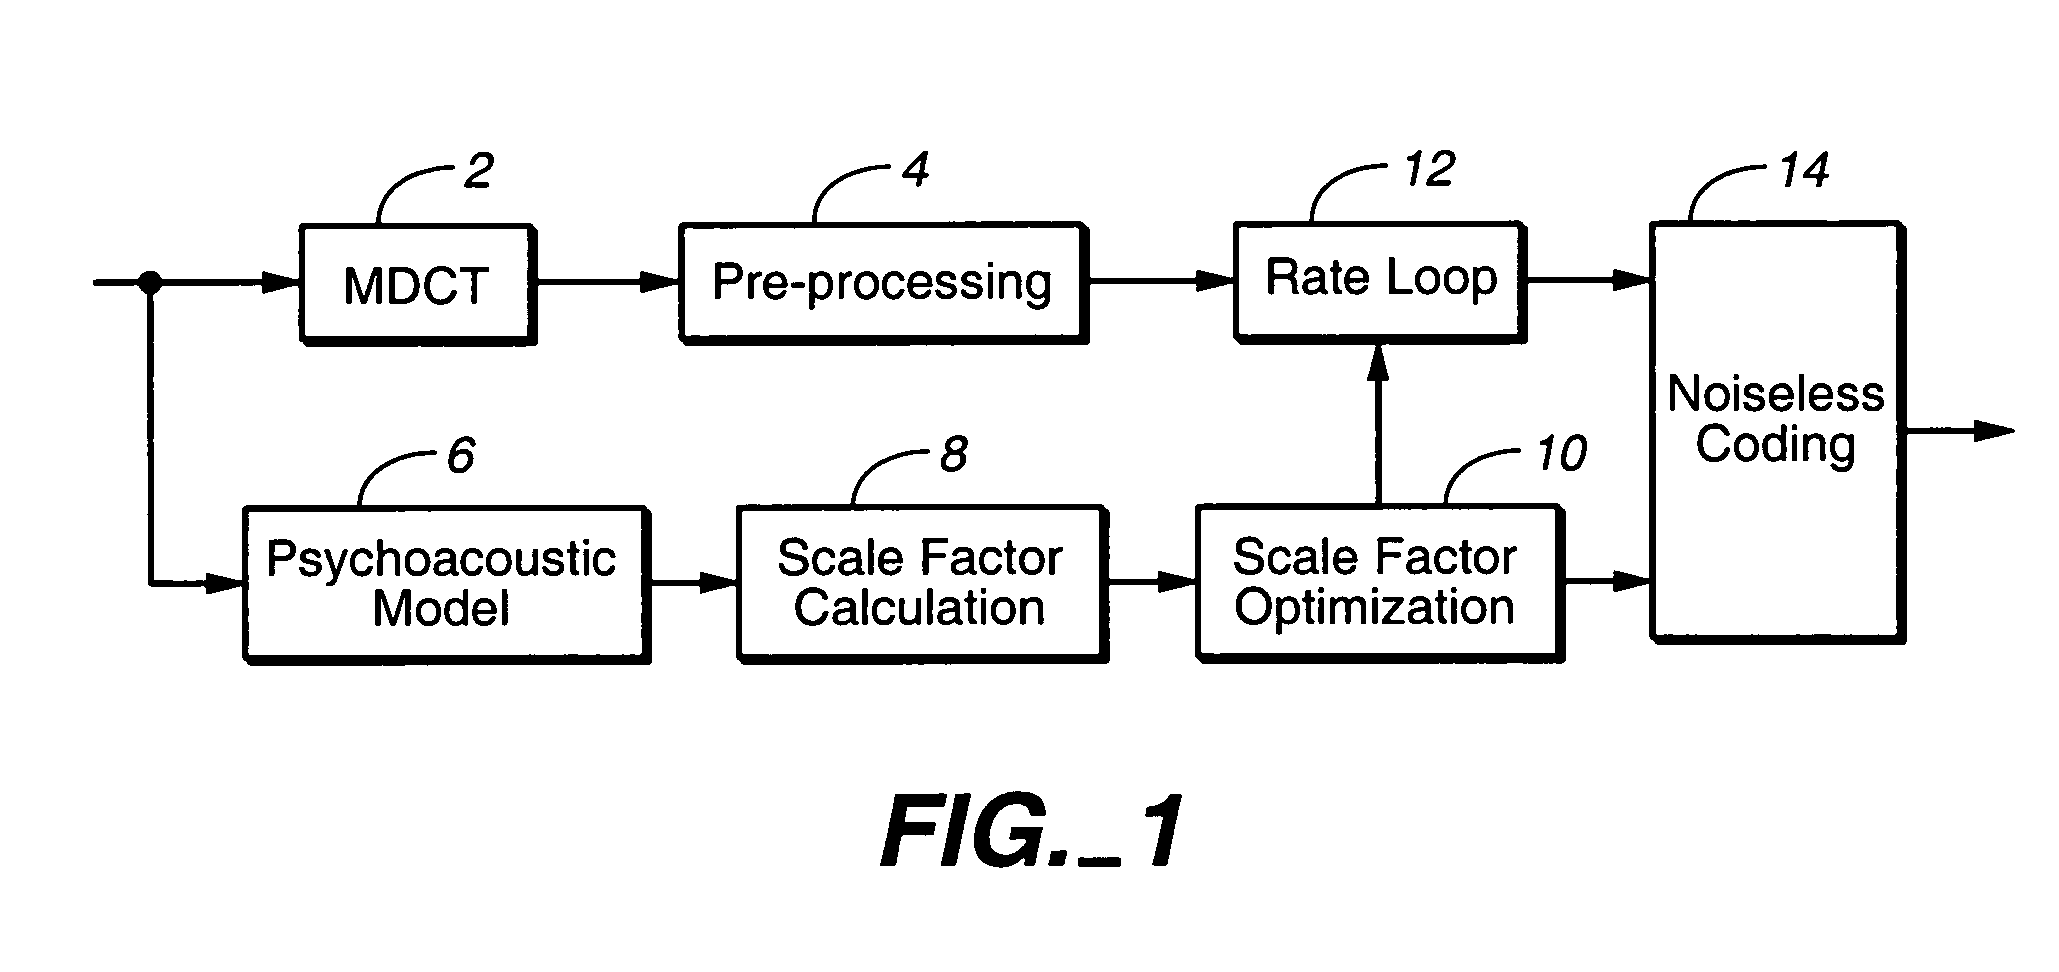 Reducing scale factor transmission cost for MPEG-2 advanced audio coding (AAC) using a lattice based post processing technique